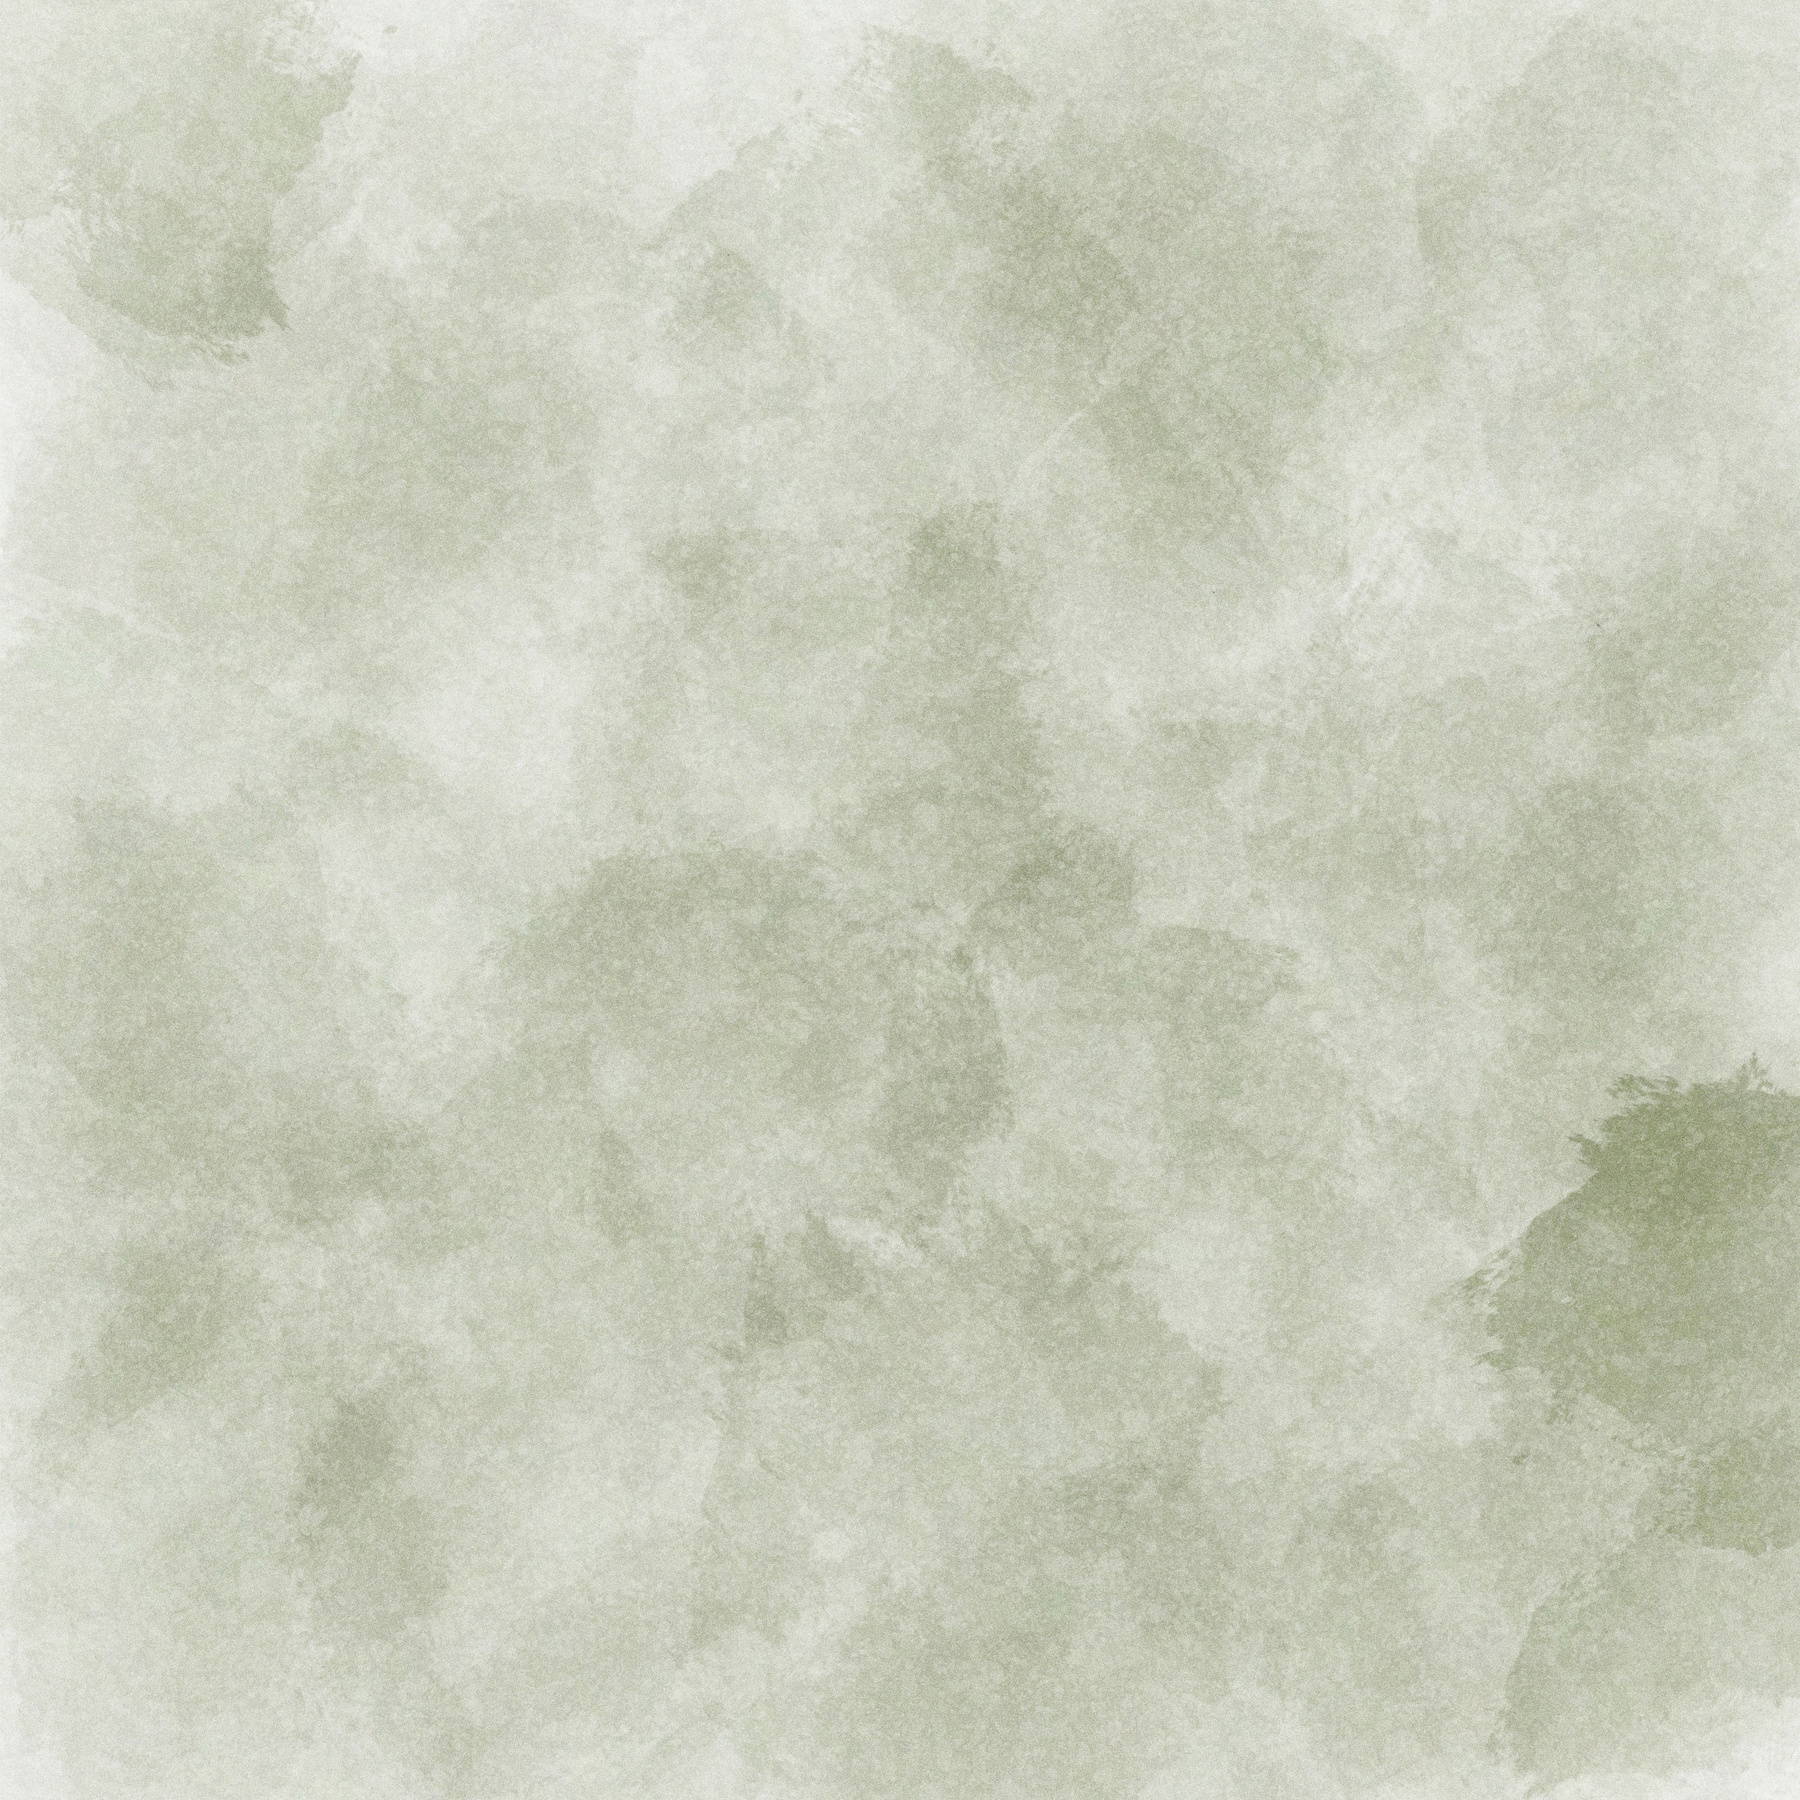 Abstract Neutral Watercolor Texture